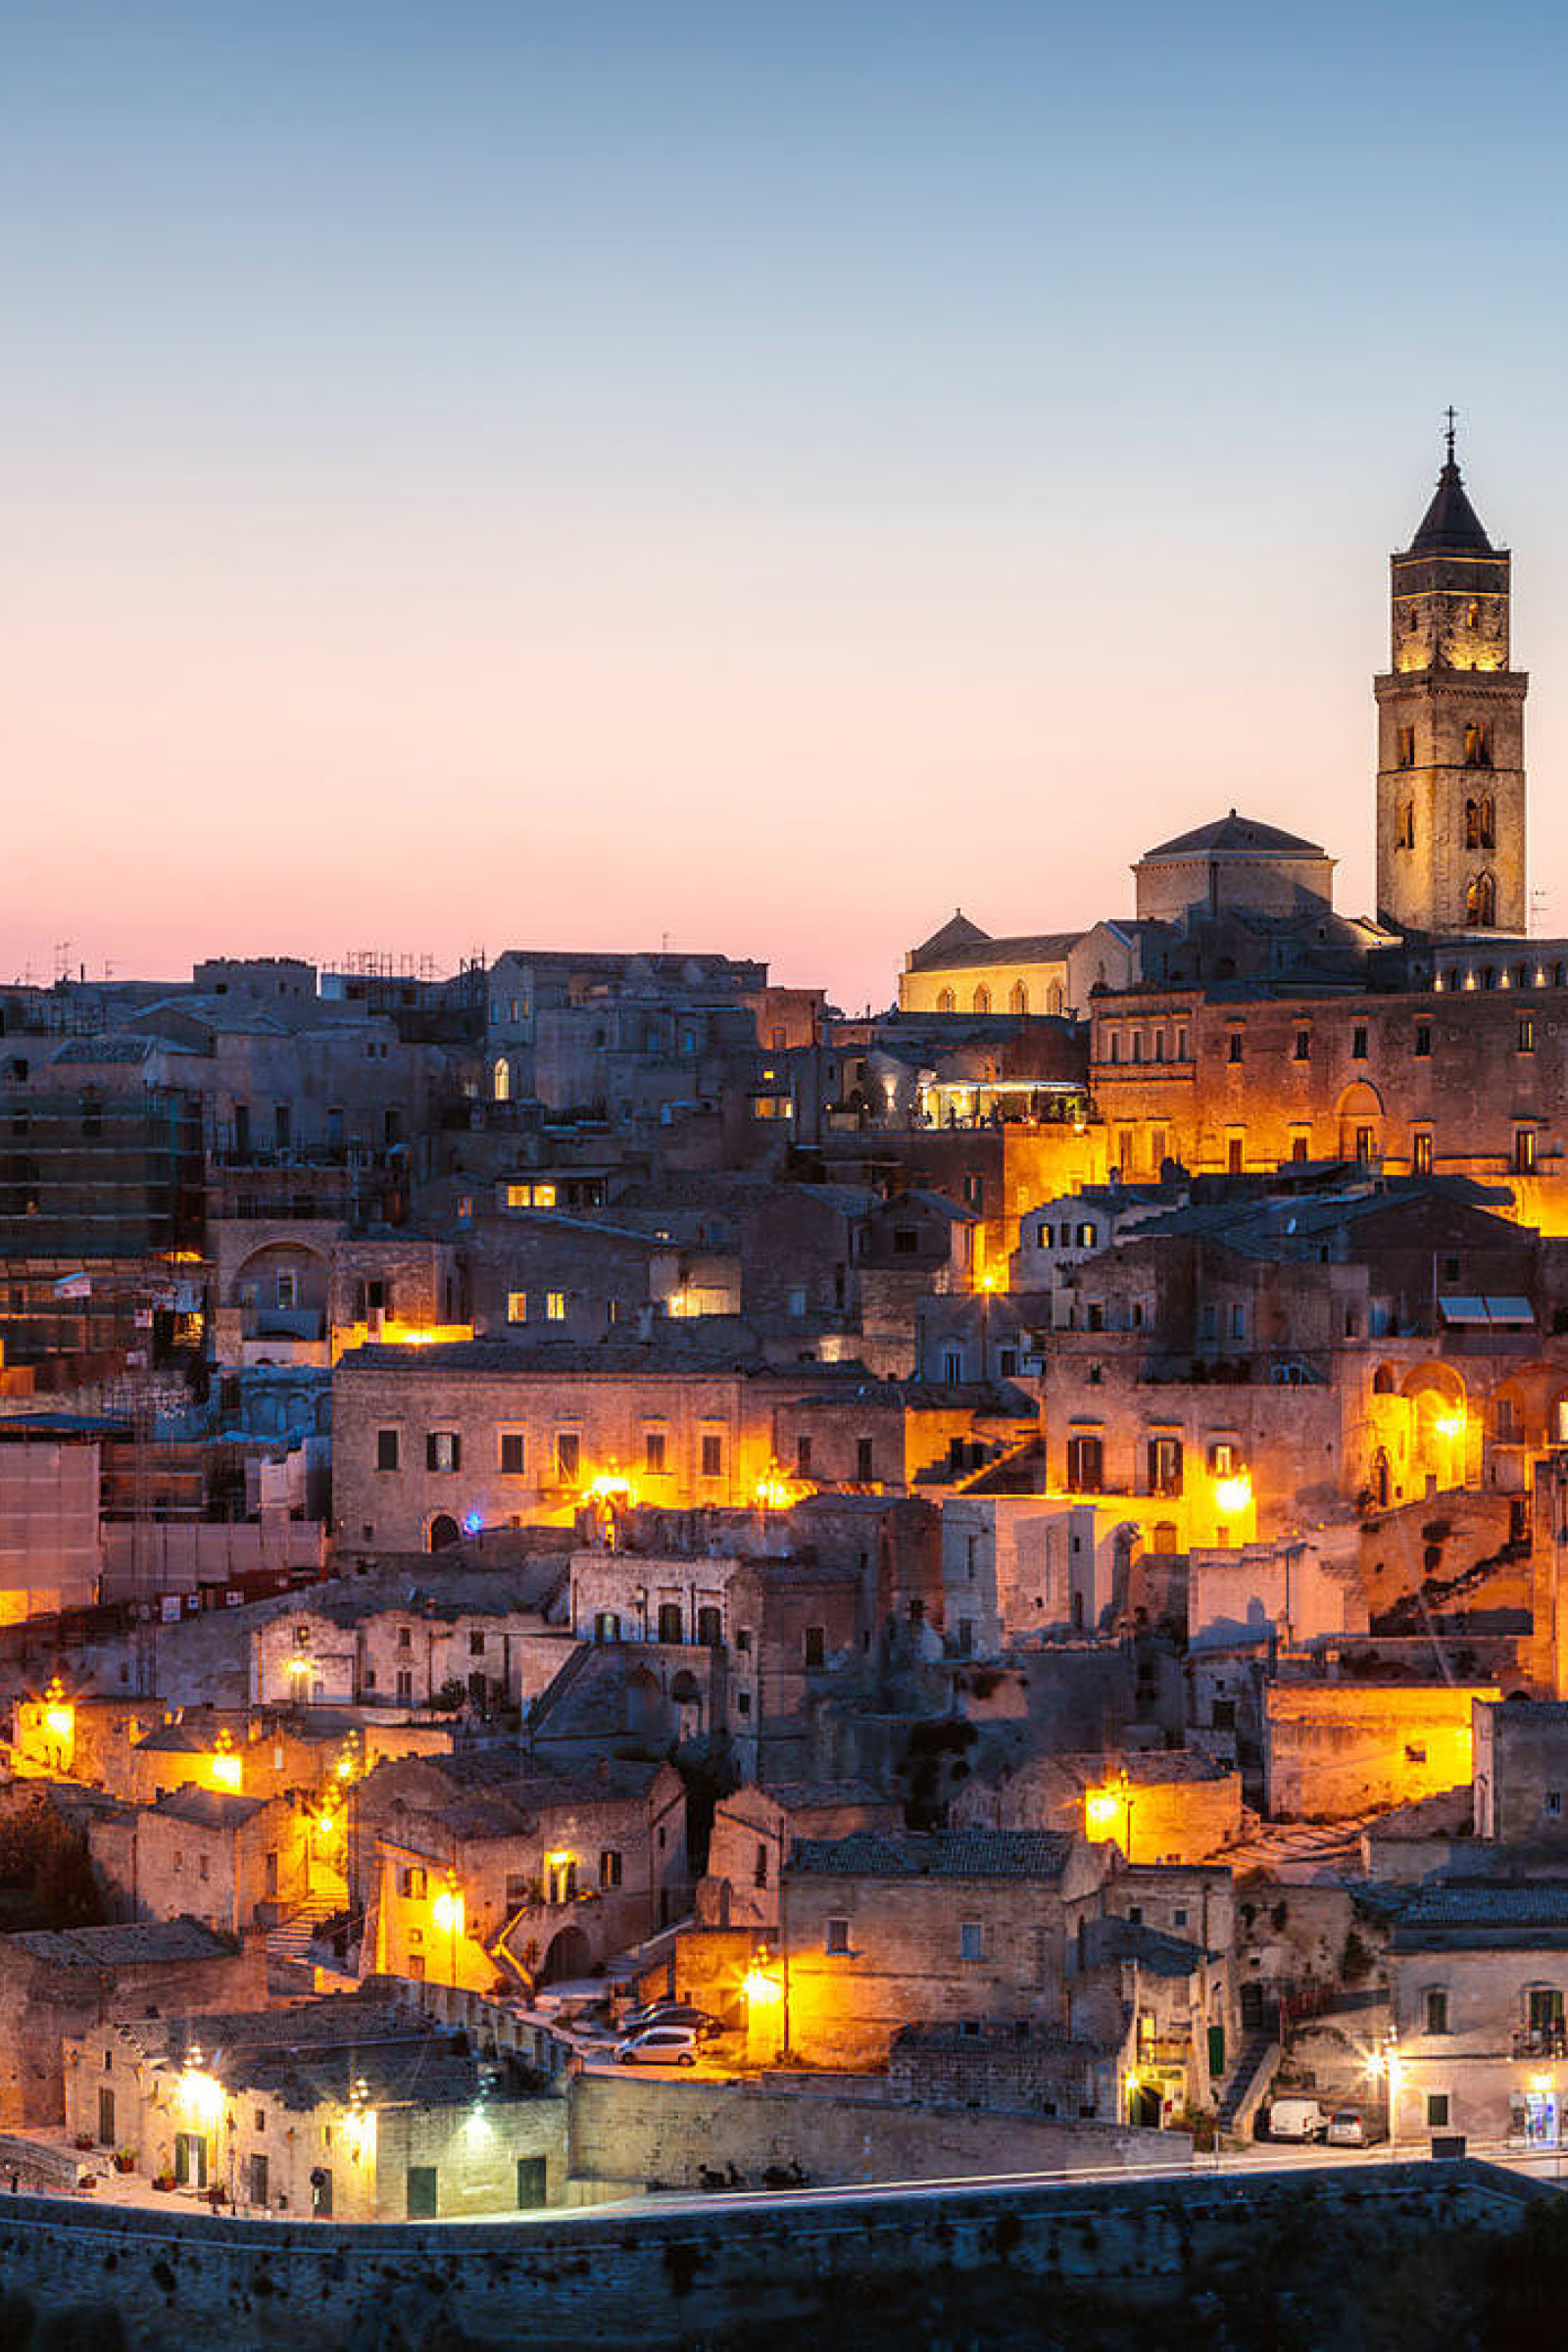 visit-matera-with-this-exclusive-sybarite-experience,-in-partnership-with-il-palazzotto-residences-and-winery.jpeg